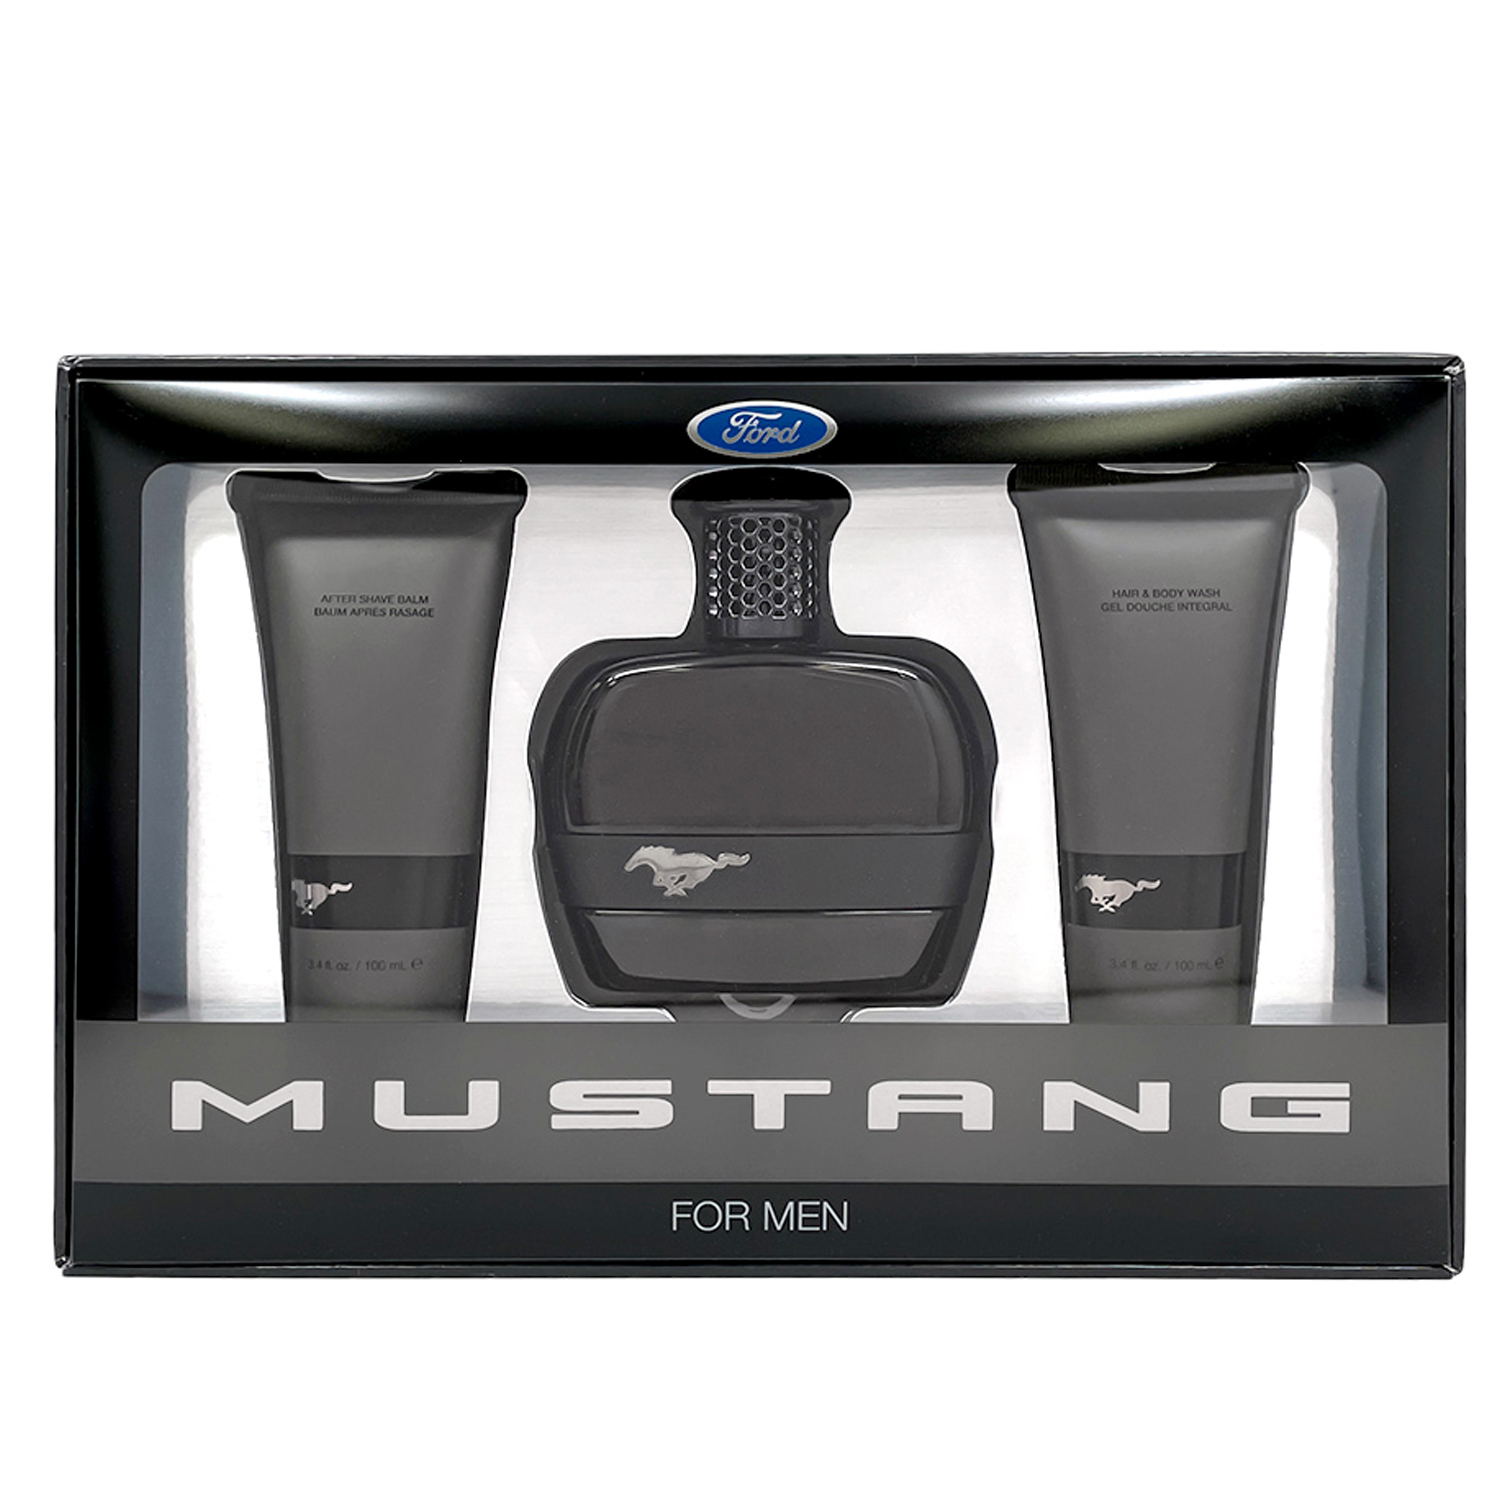 Mustang - Black Set Oz Shave - After 3.4 Oz Oz Beauty Body and Edt/3.4 / Hair 3.4 Balm Bridge Wash